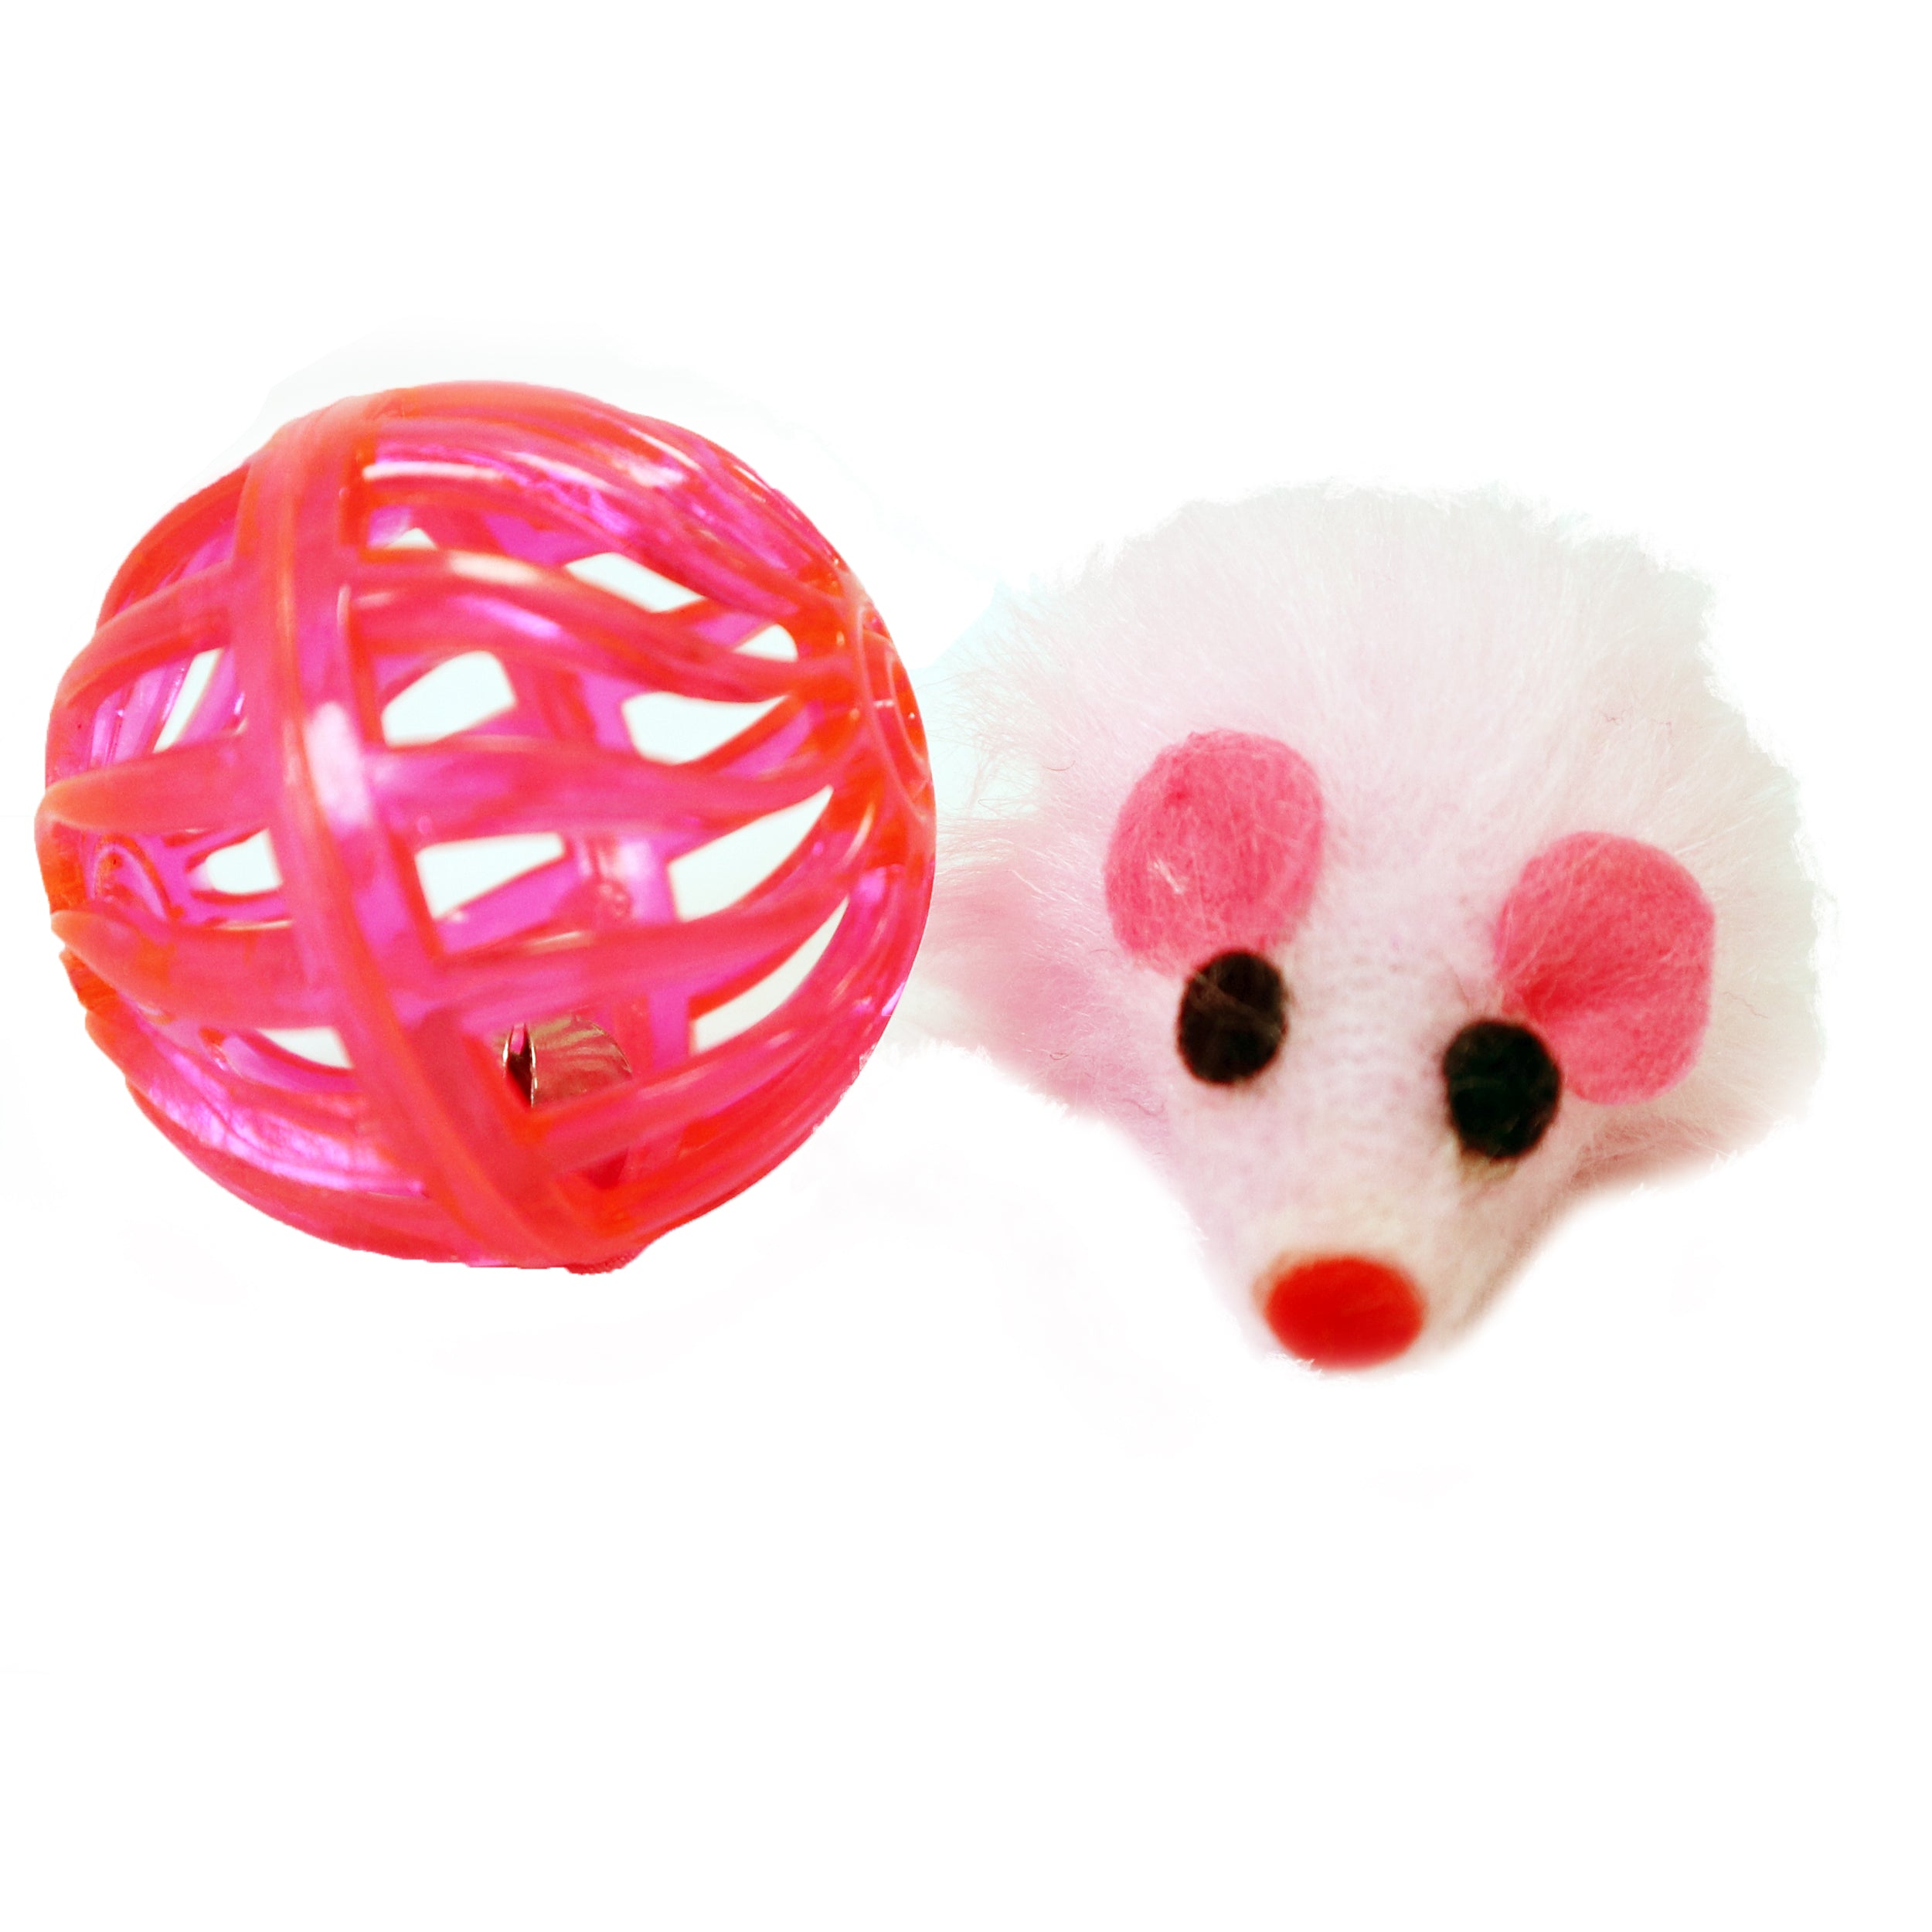 Pink Multitextured Ball Ball with one Furry Pink mouse with String Tail 2 piece one pack cat toy for cats and kittens fun exciting toy Close Up detailed image 